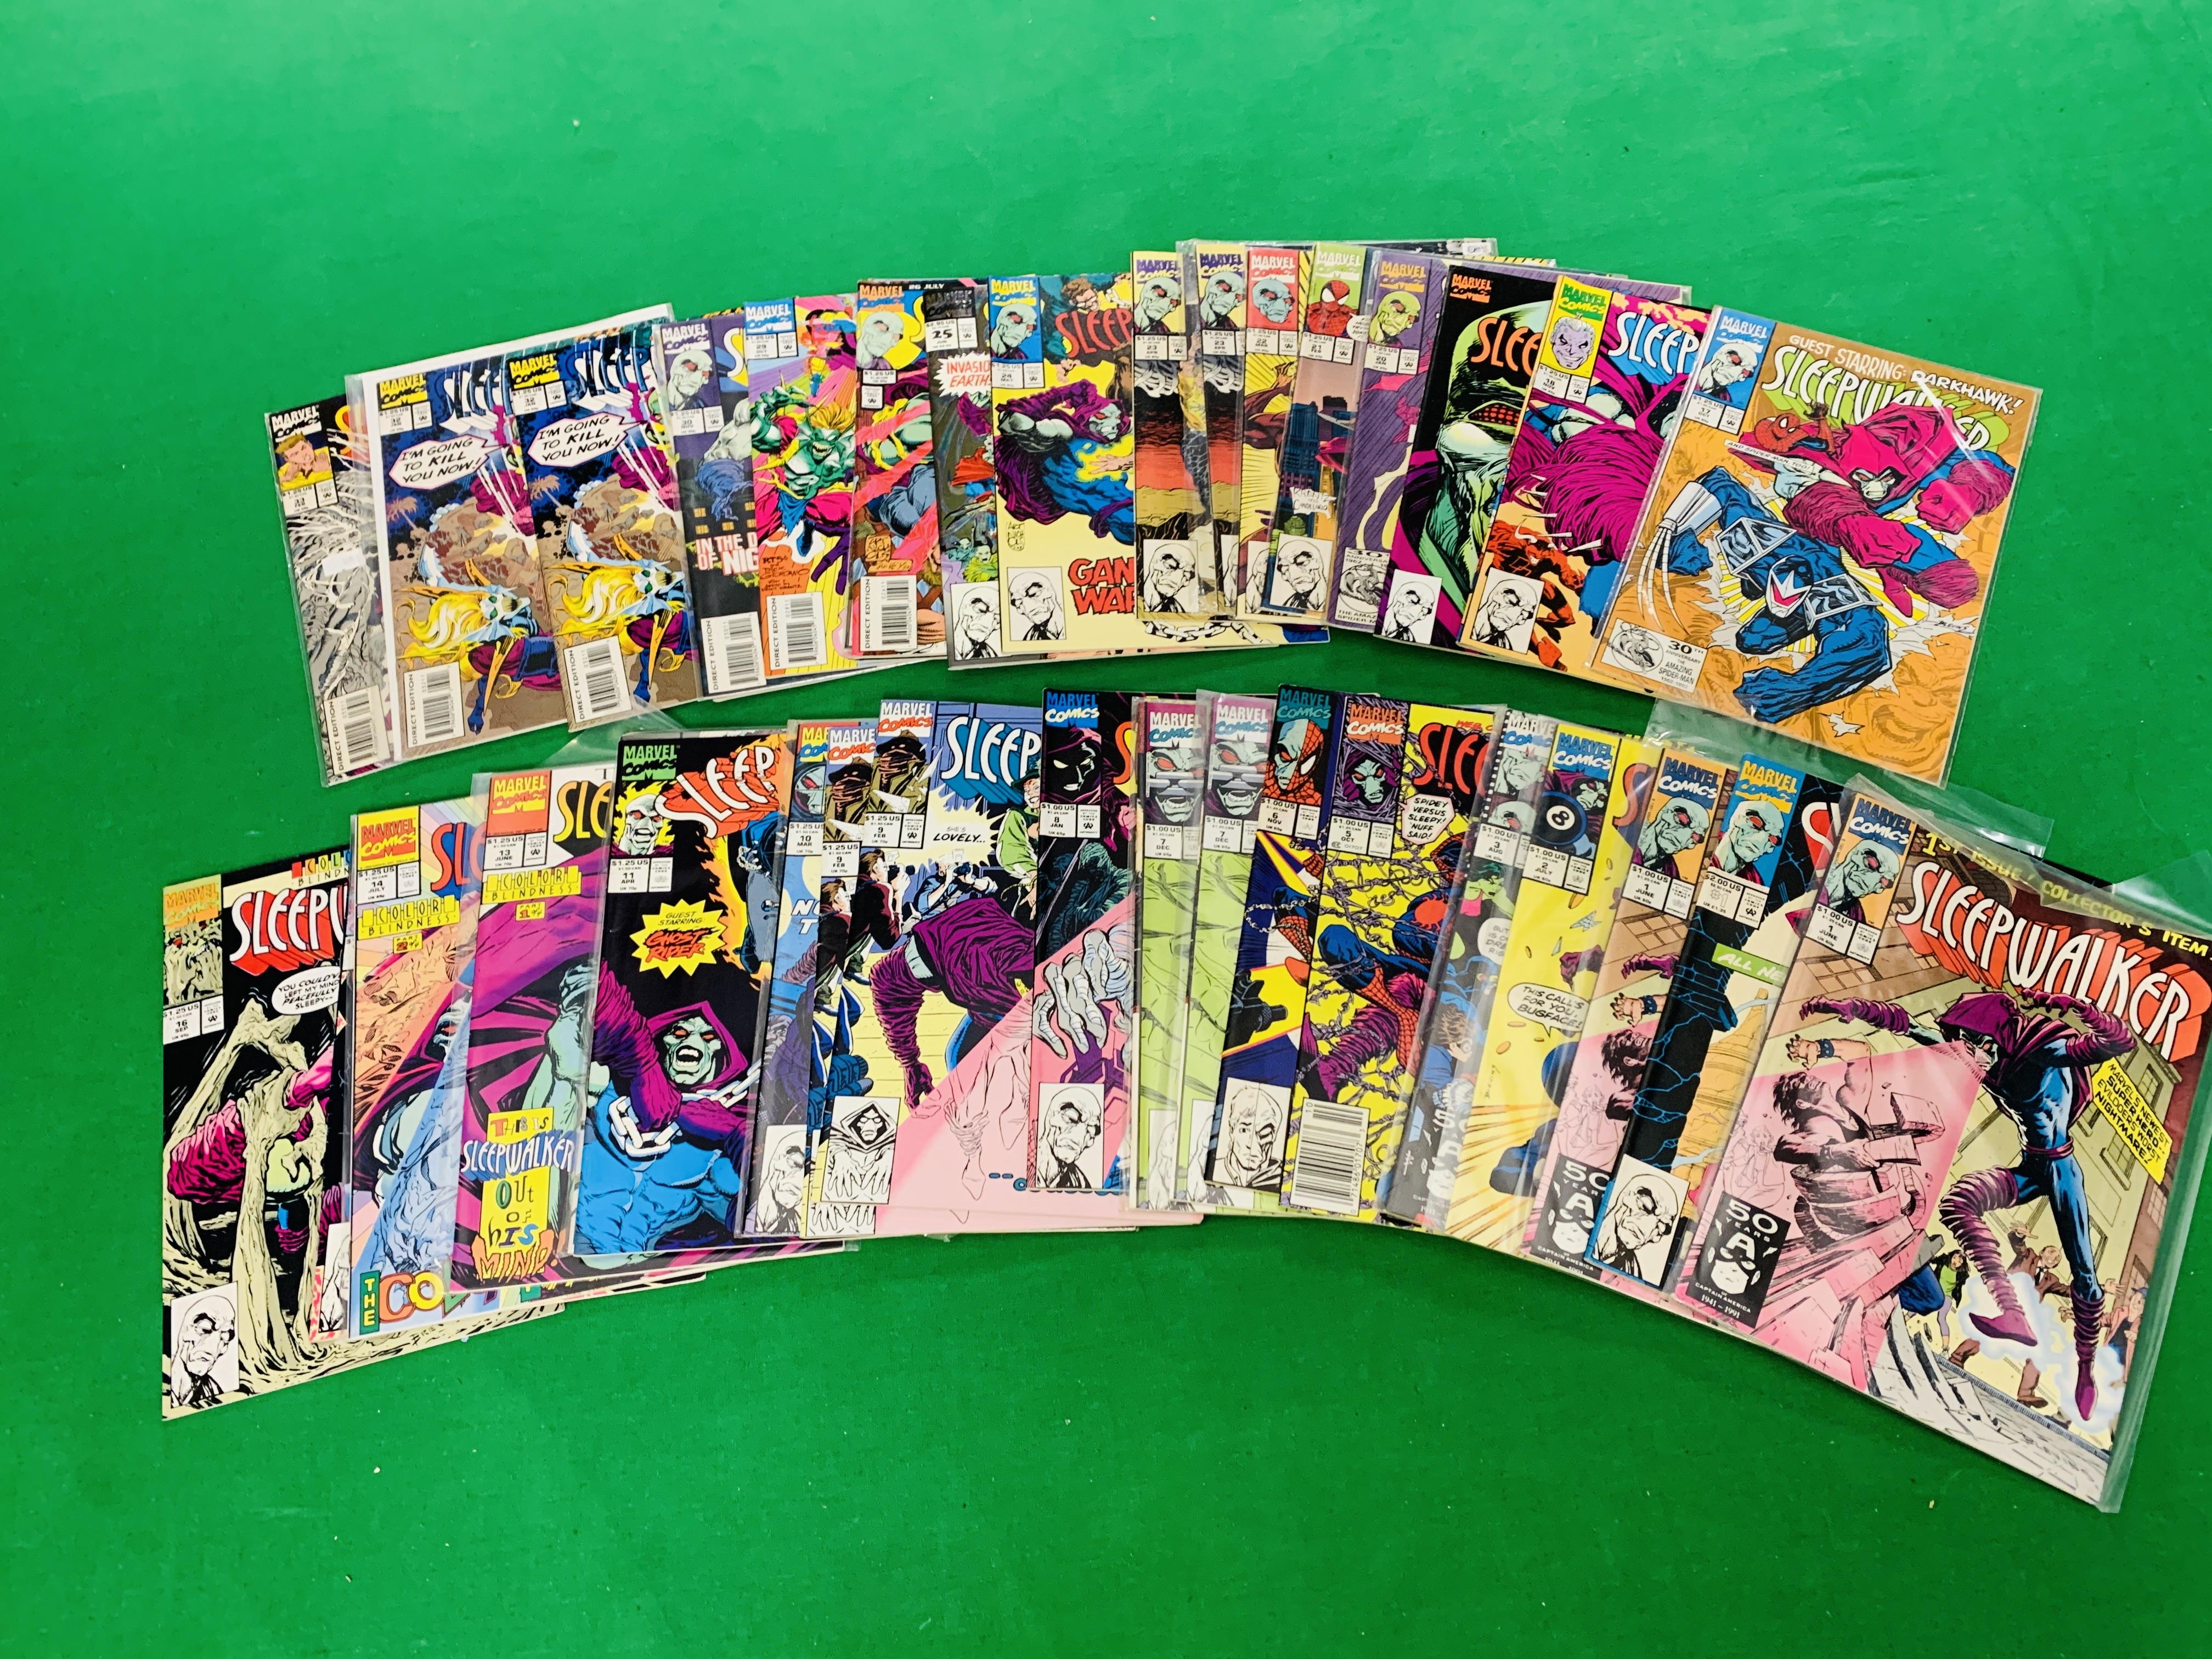 MARVEL COMICS SLEEPWALKER NO. 1 - 33 FROM 1991, FIRST APPEARANCE NO.